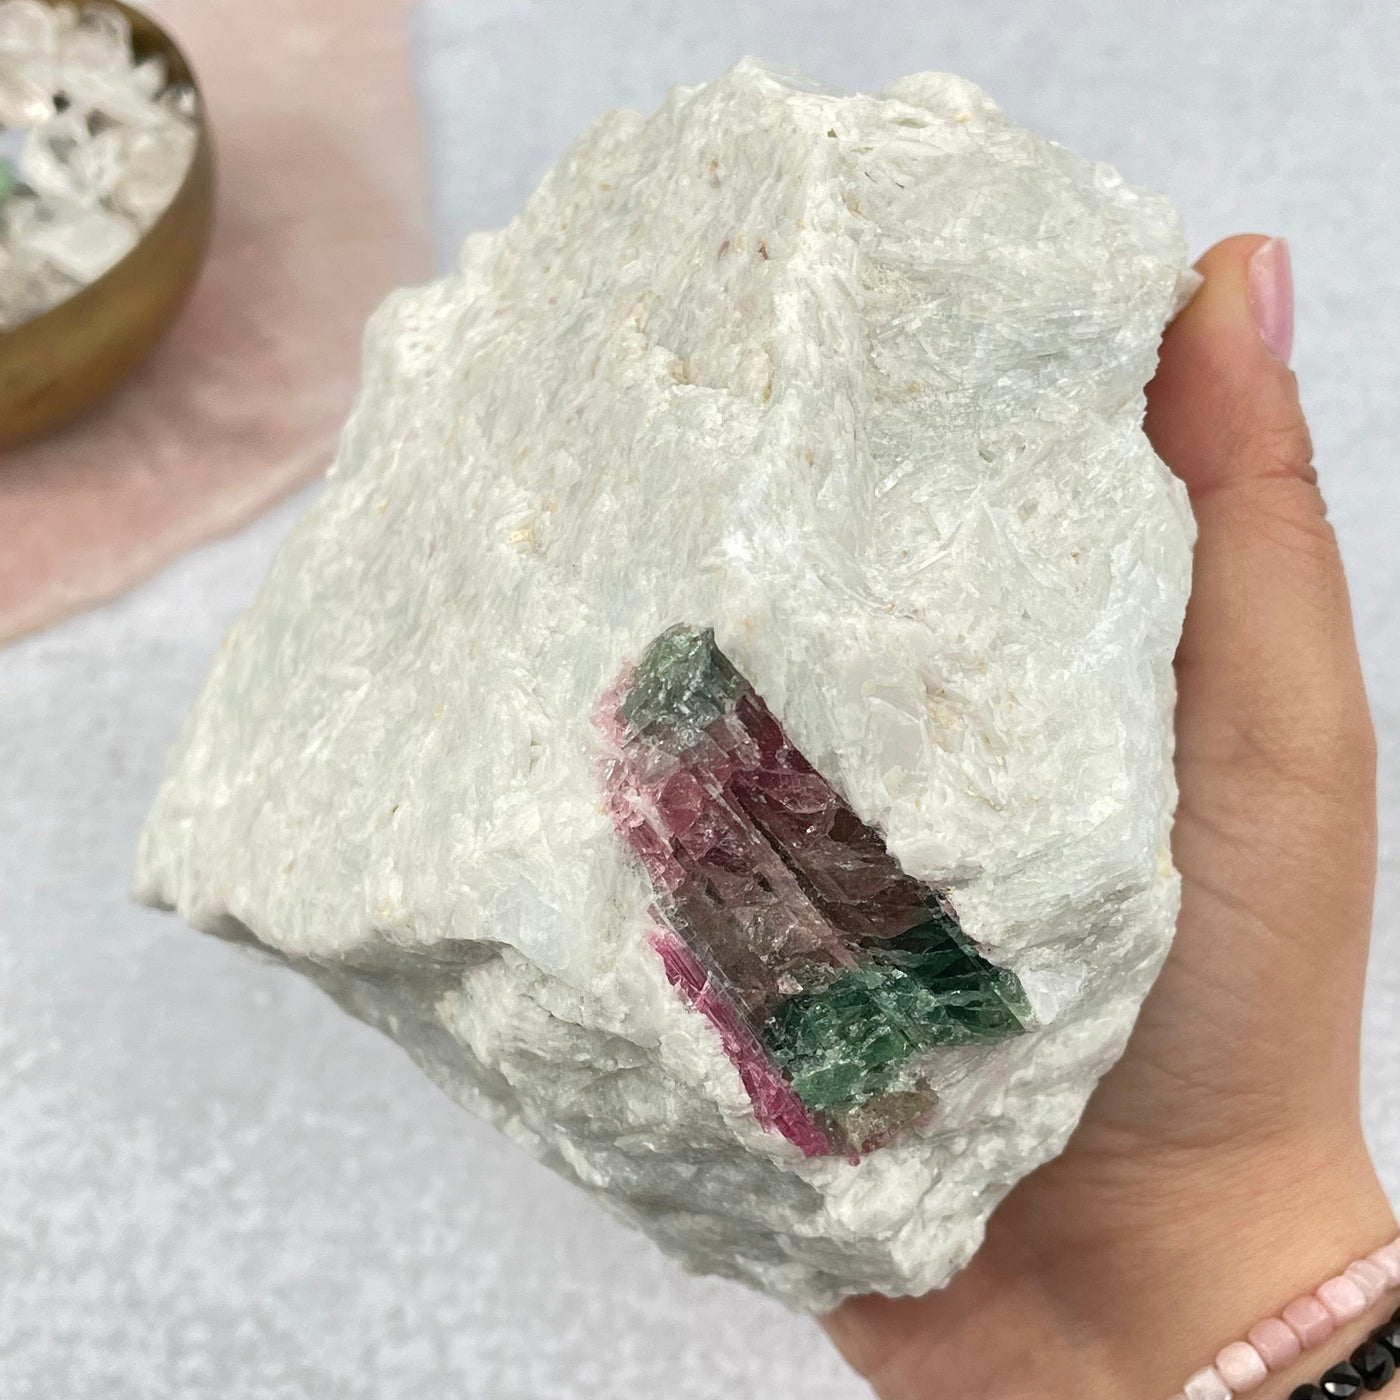 watermelon tourmaline in hand for size reference 